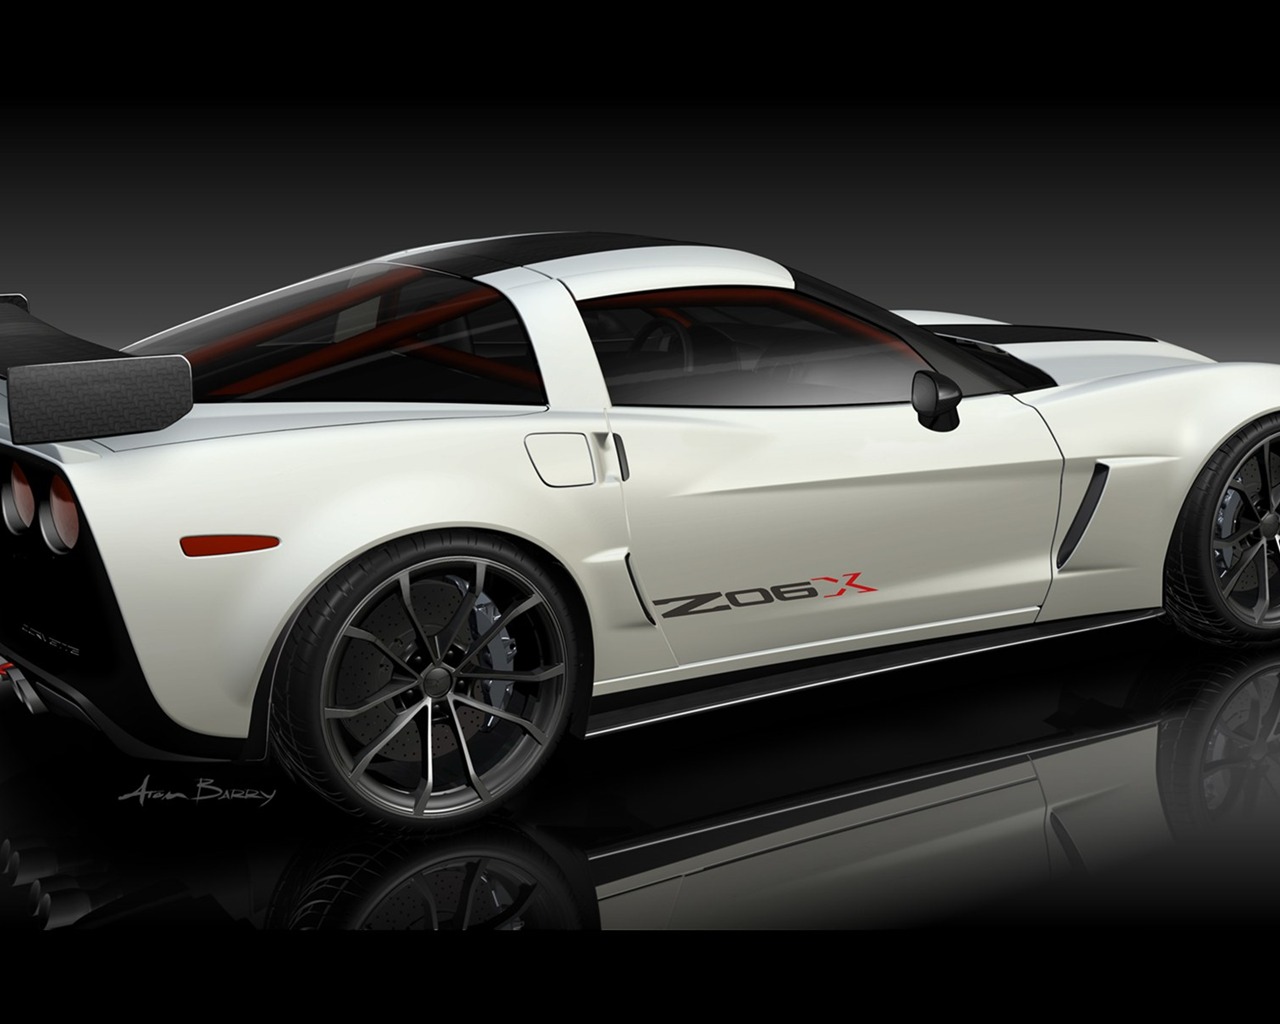 Special edition of concept cars wallpaper (15) #12 - 1280x1024